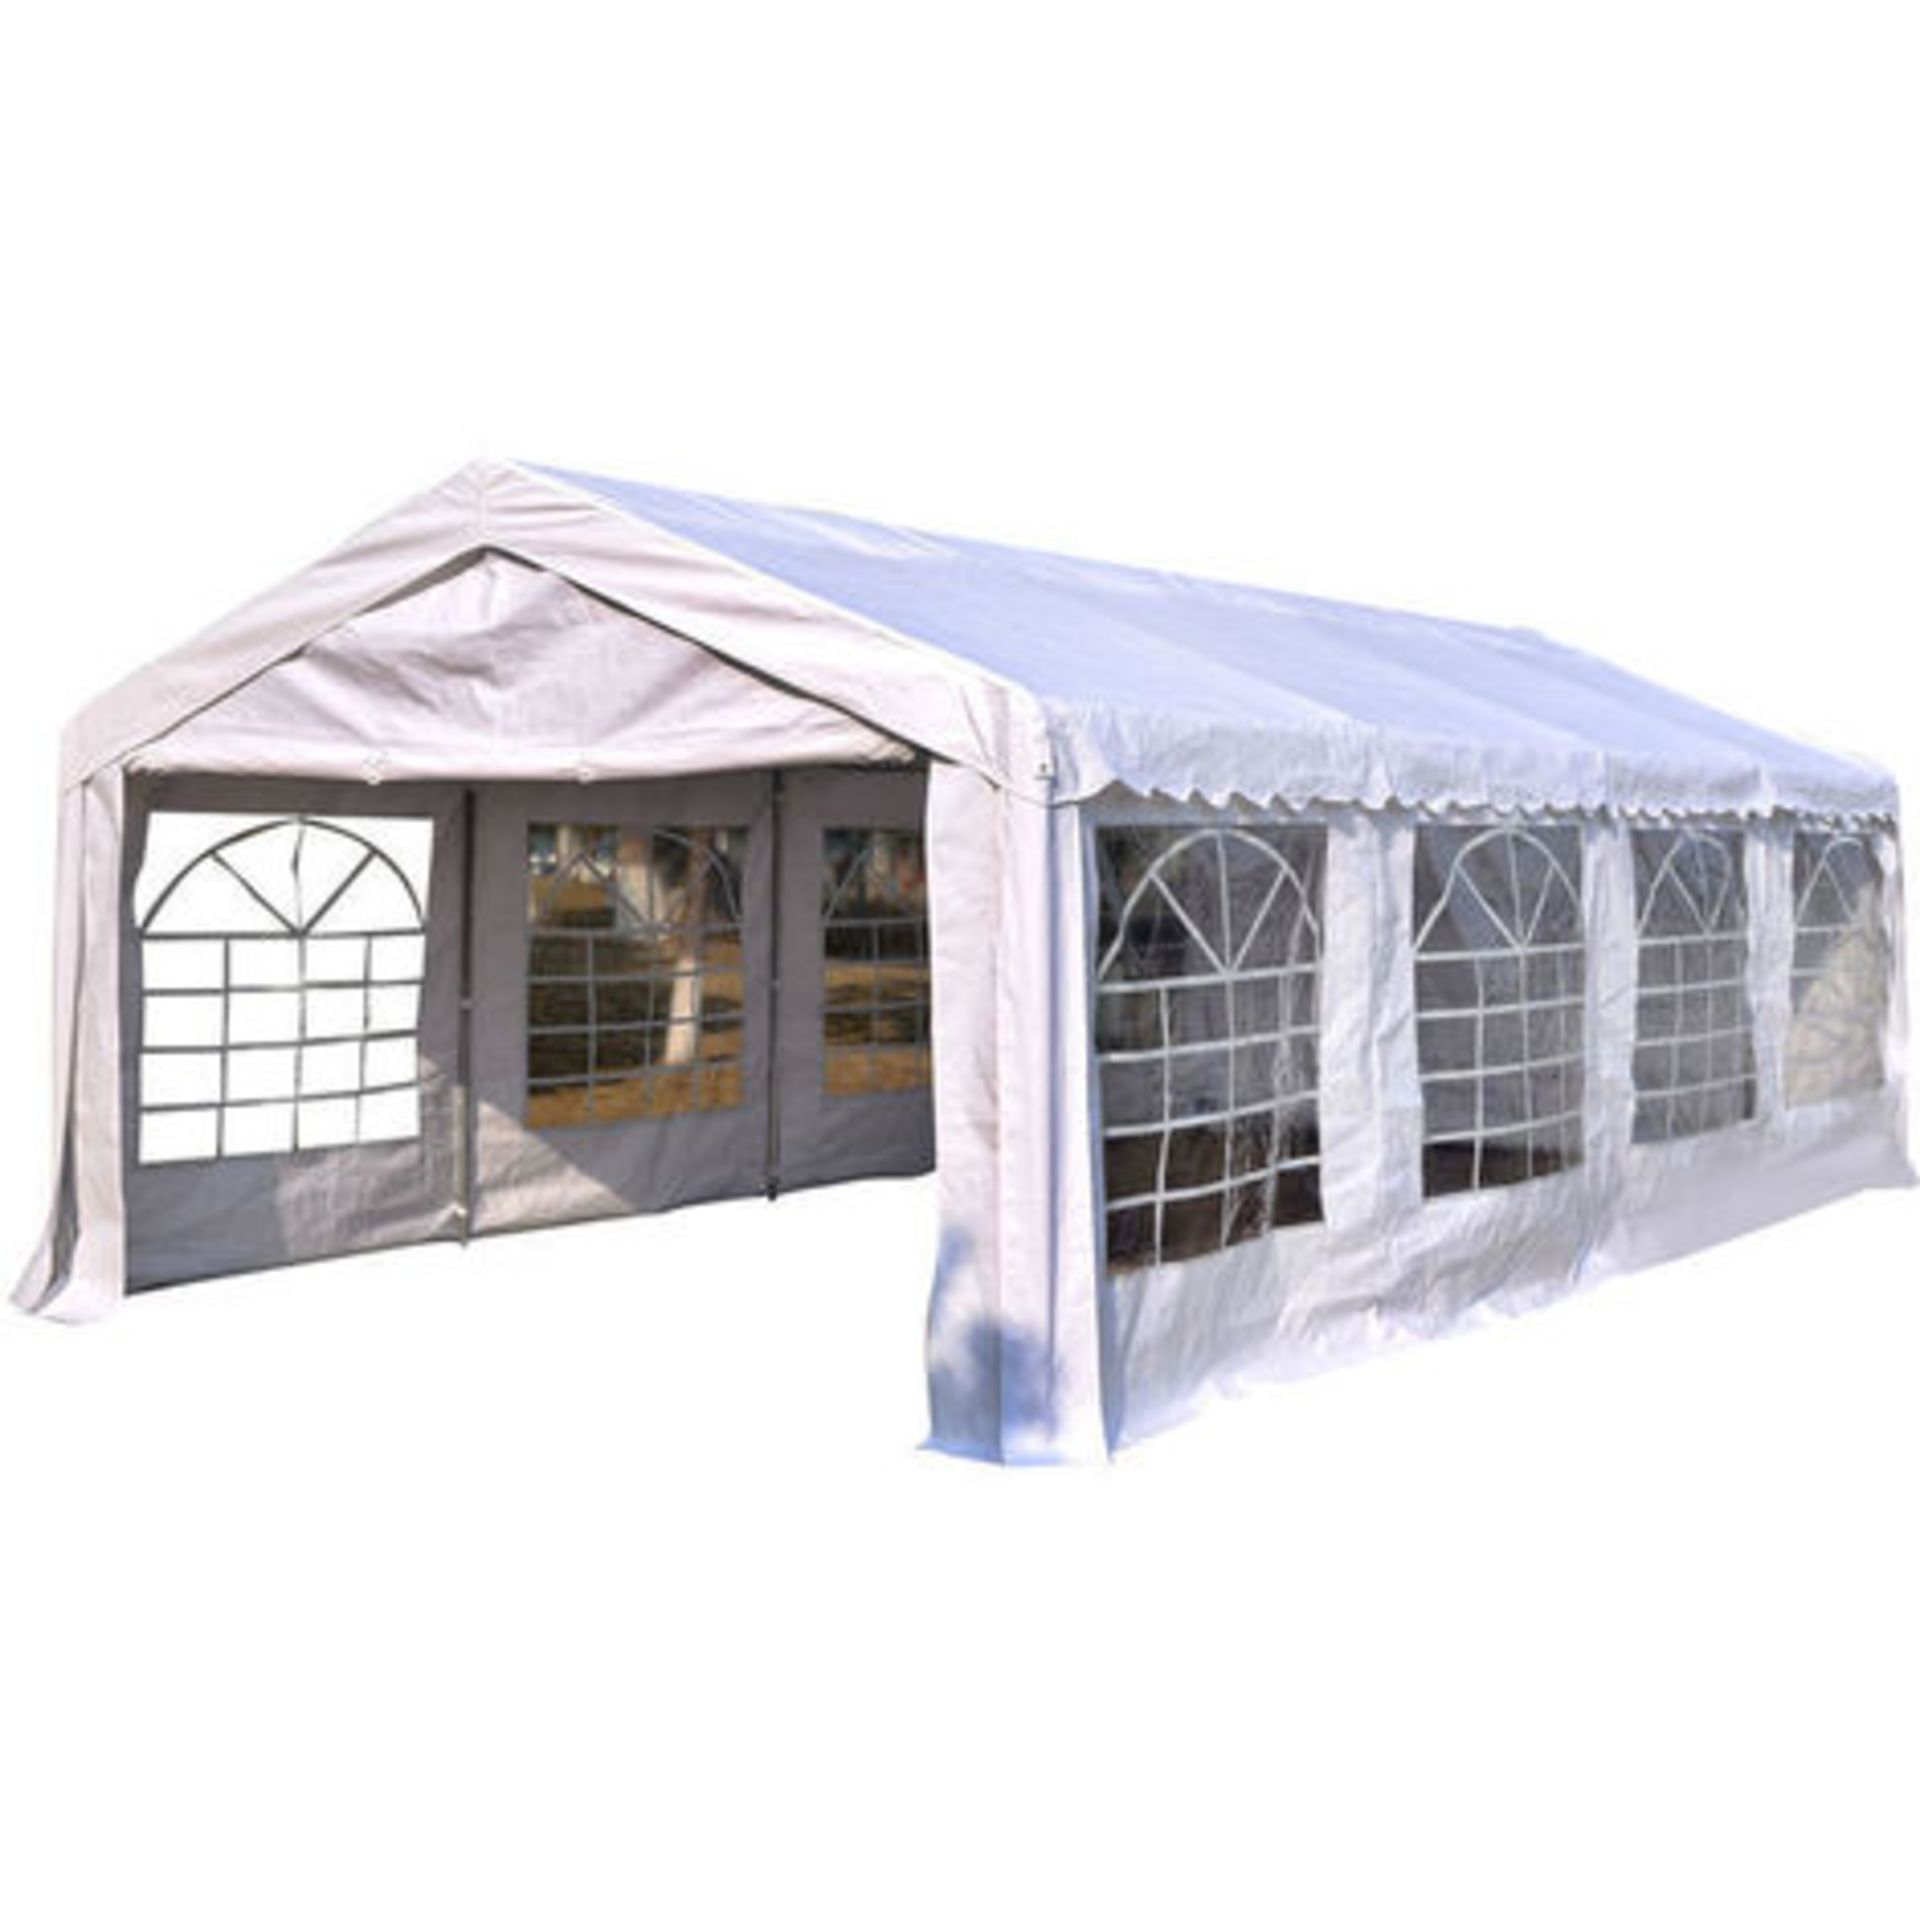 V Brand New 8m x 4m White Gazebo Marquee Party Tent With Steel Frame (Available Approx 5-7 Working